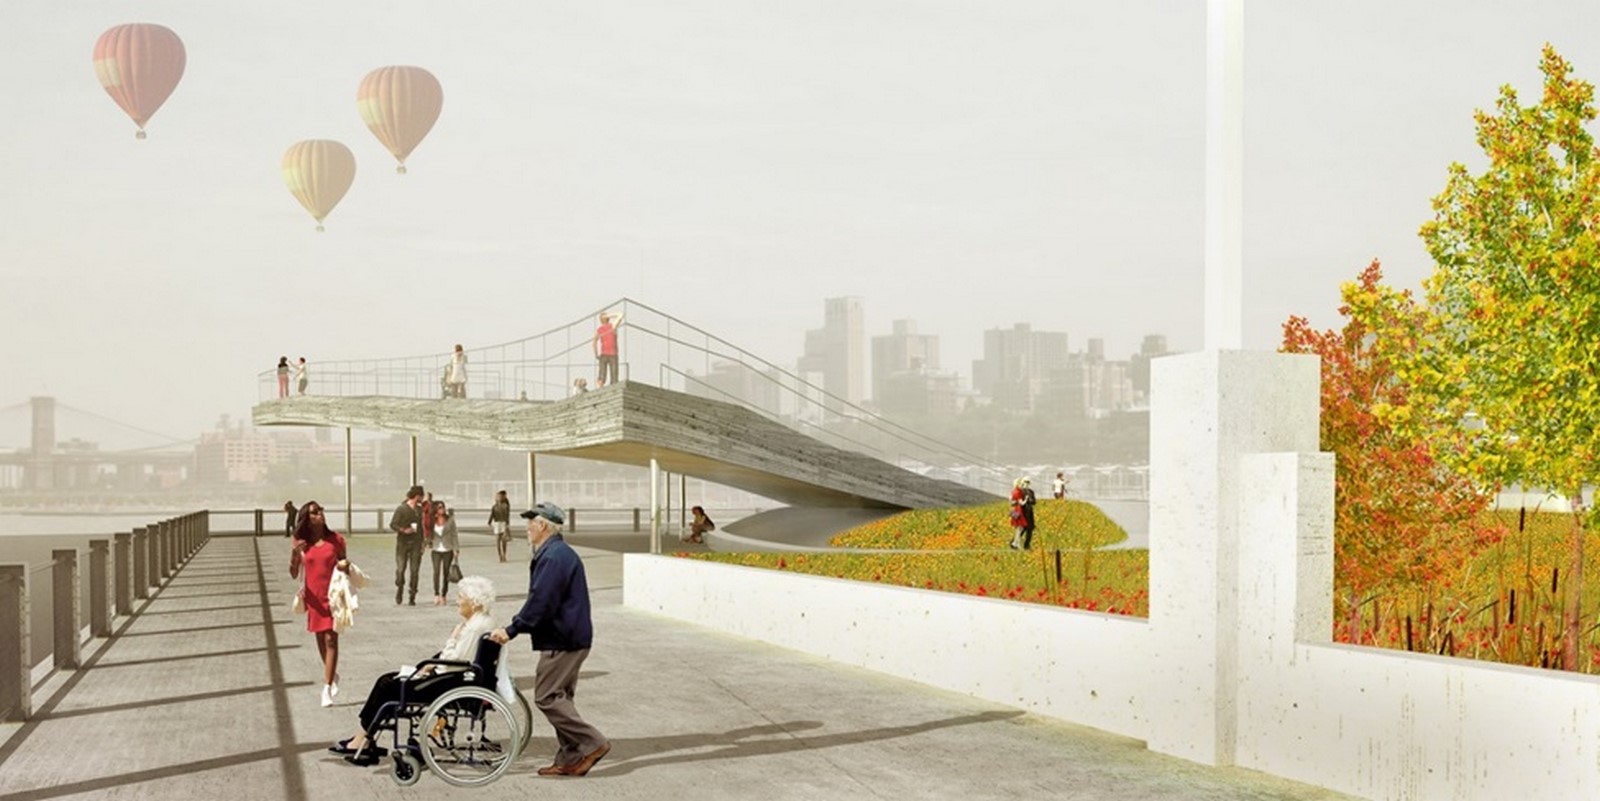 BIG- 10 Iconic Public Spaces Projects - Sheet20